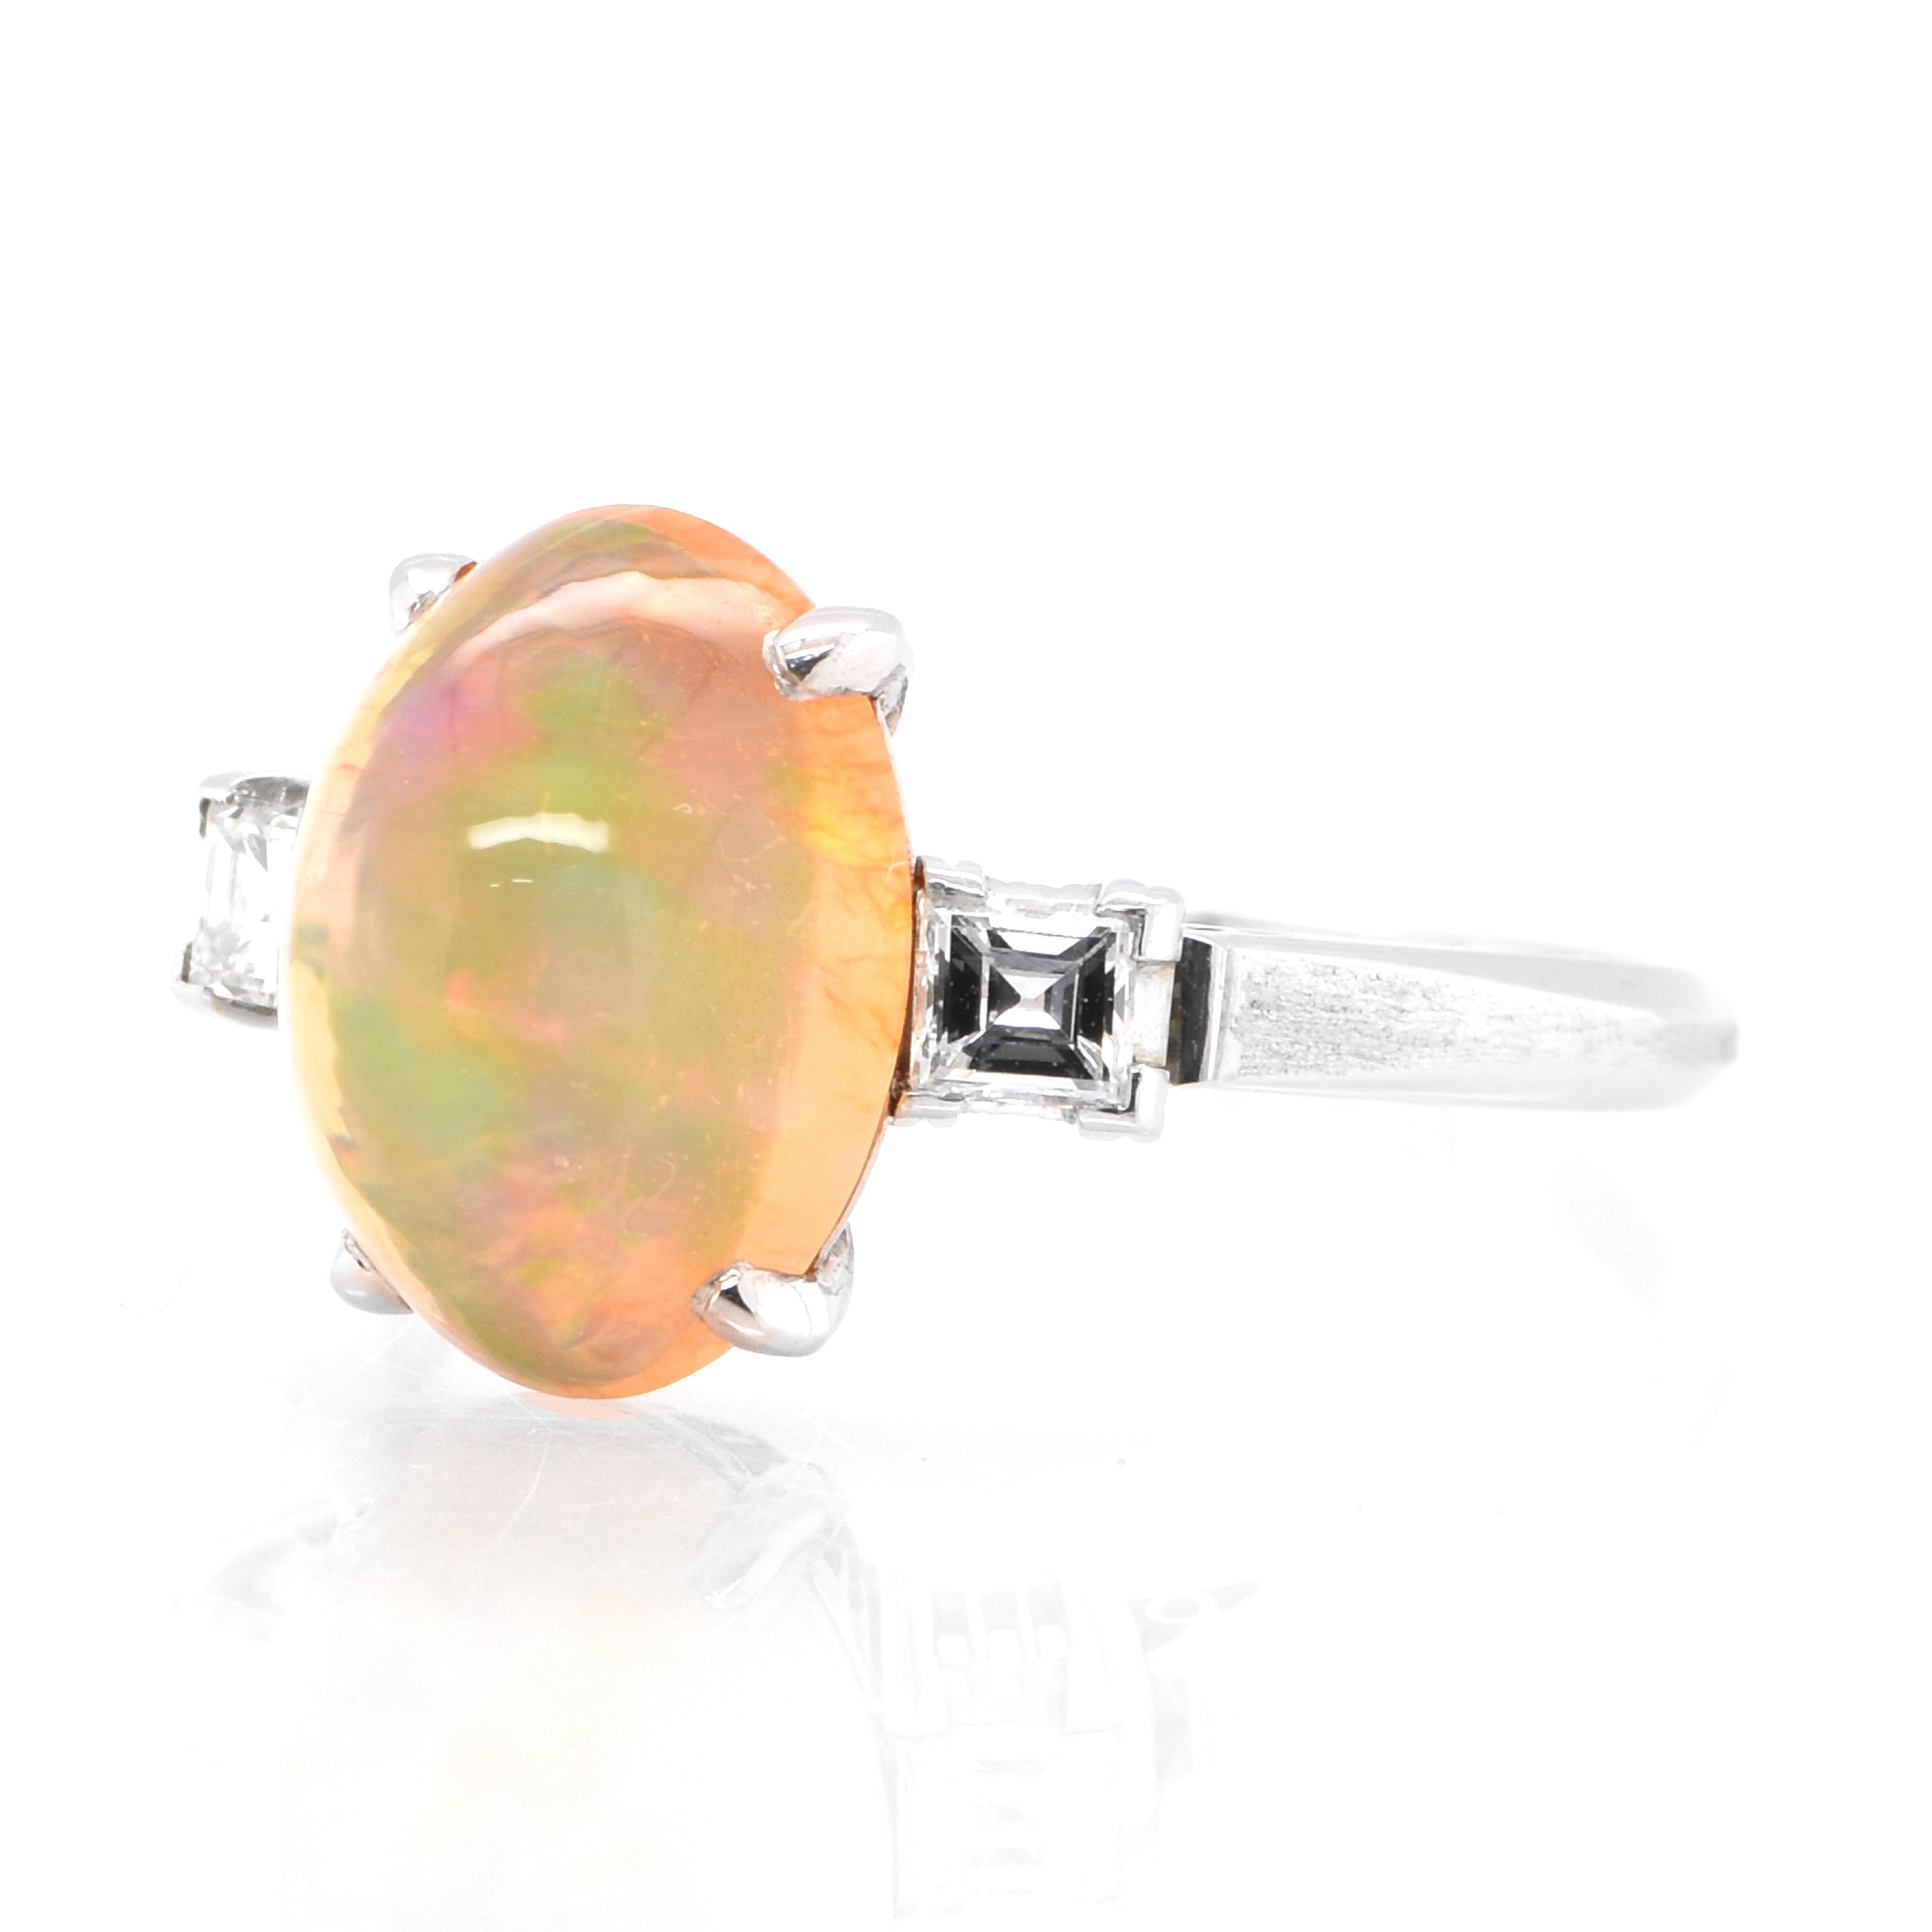 A beautiful ring featuring a 2.50 Carat Natural Mexican Fire Opal with very good play of color and 0.20 Carats of Diamond Accents set in Platinum. Opals are known for exhibiting flashes of rainbow colors known as 